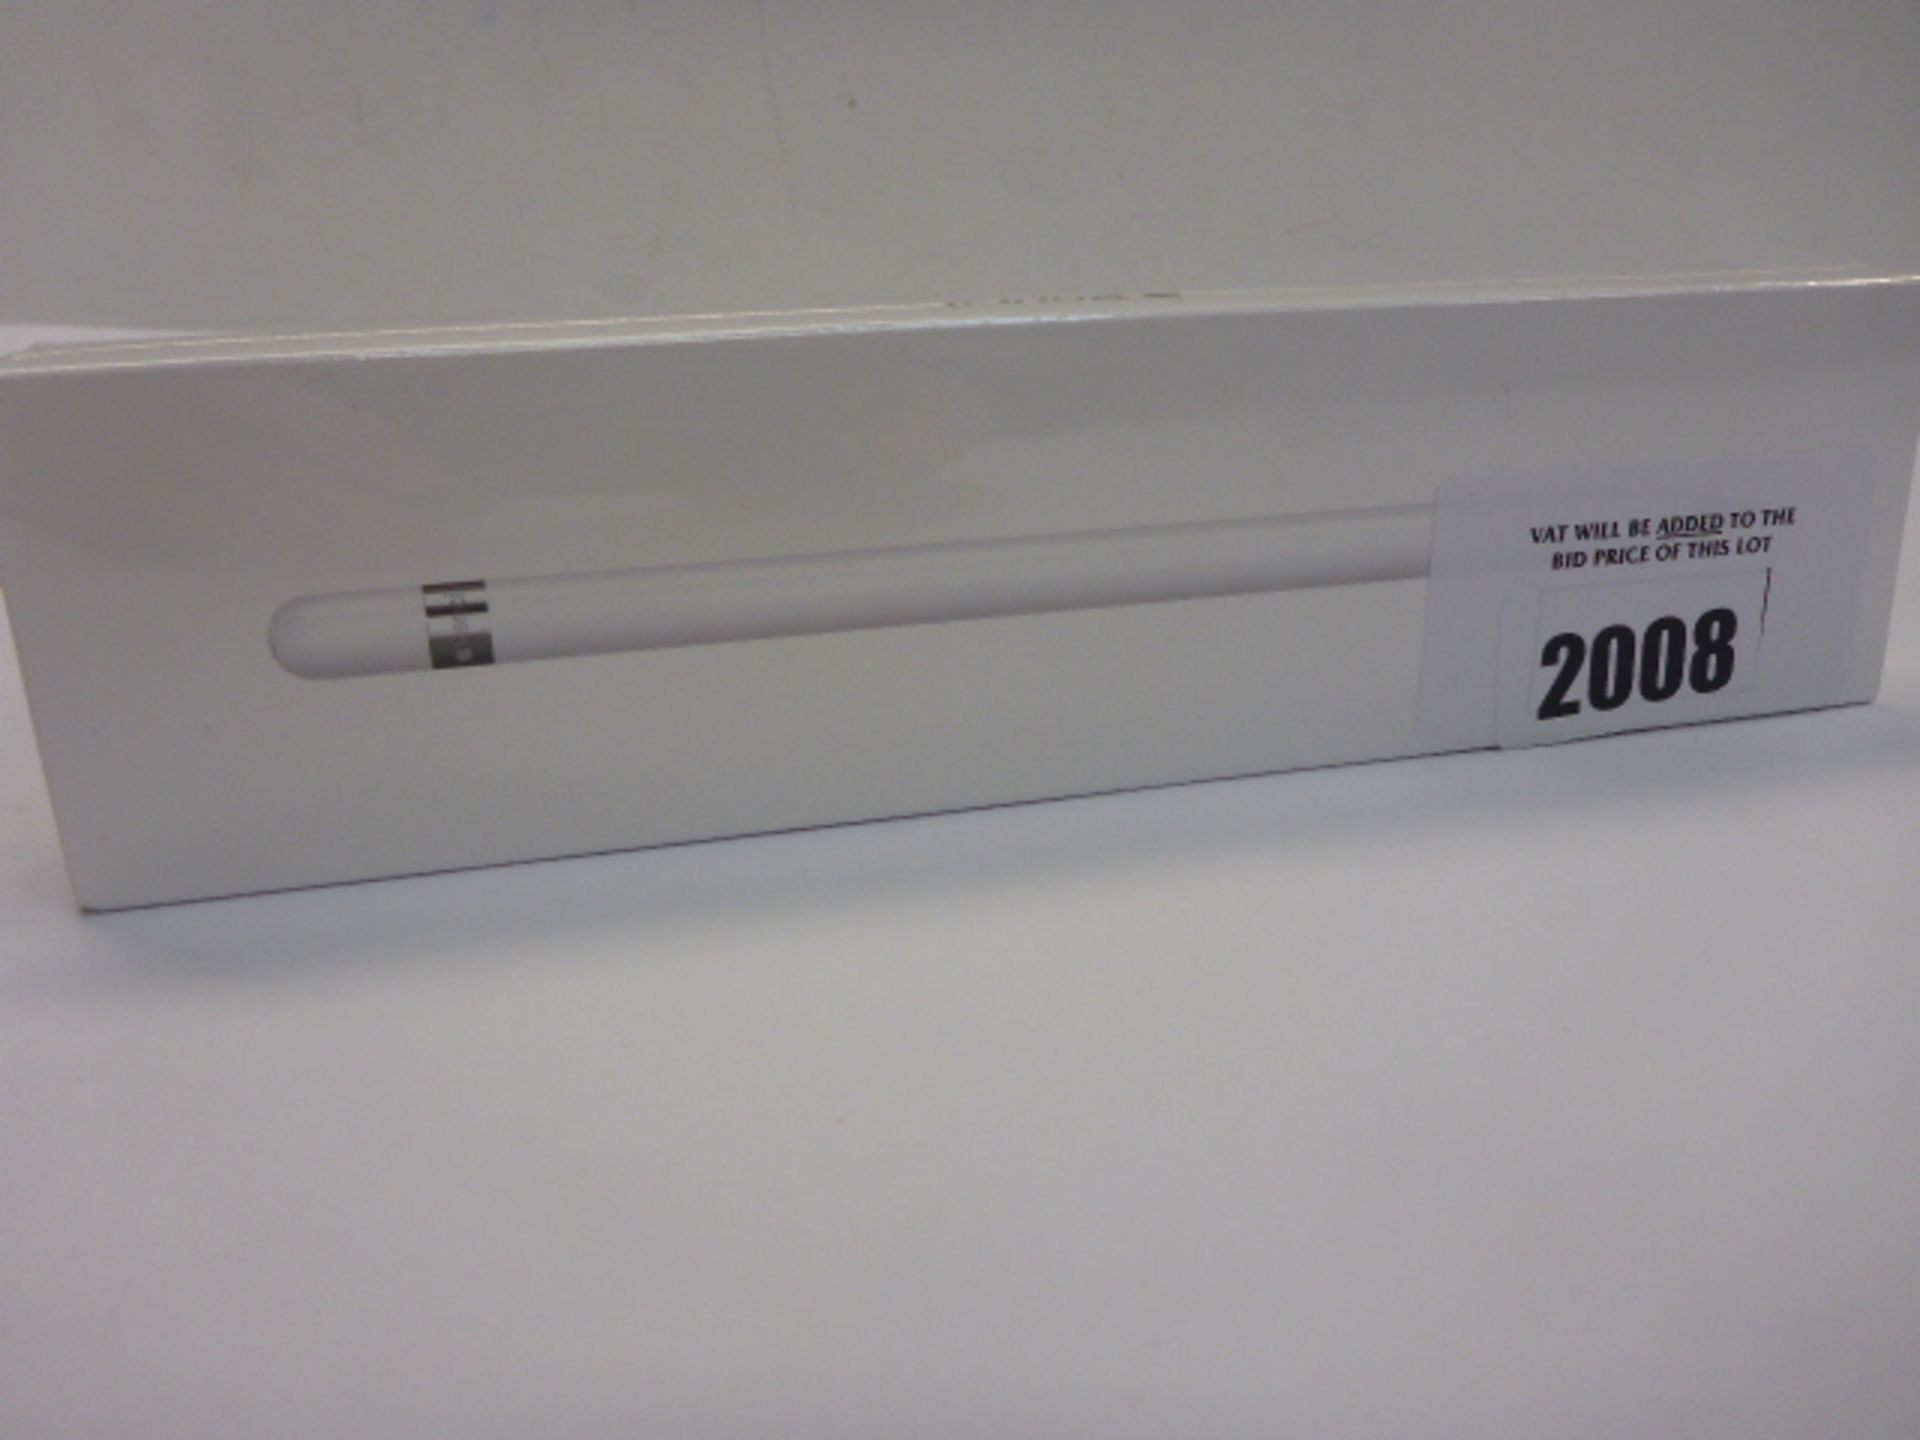 Apple Pencil Model A1603 in sealed box.